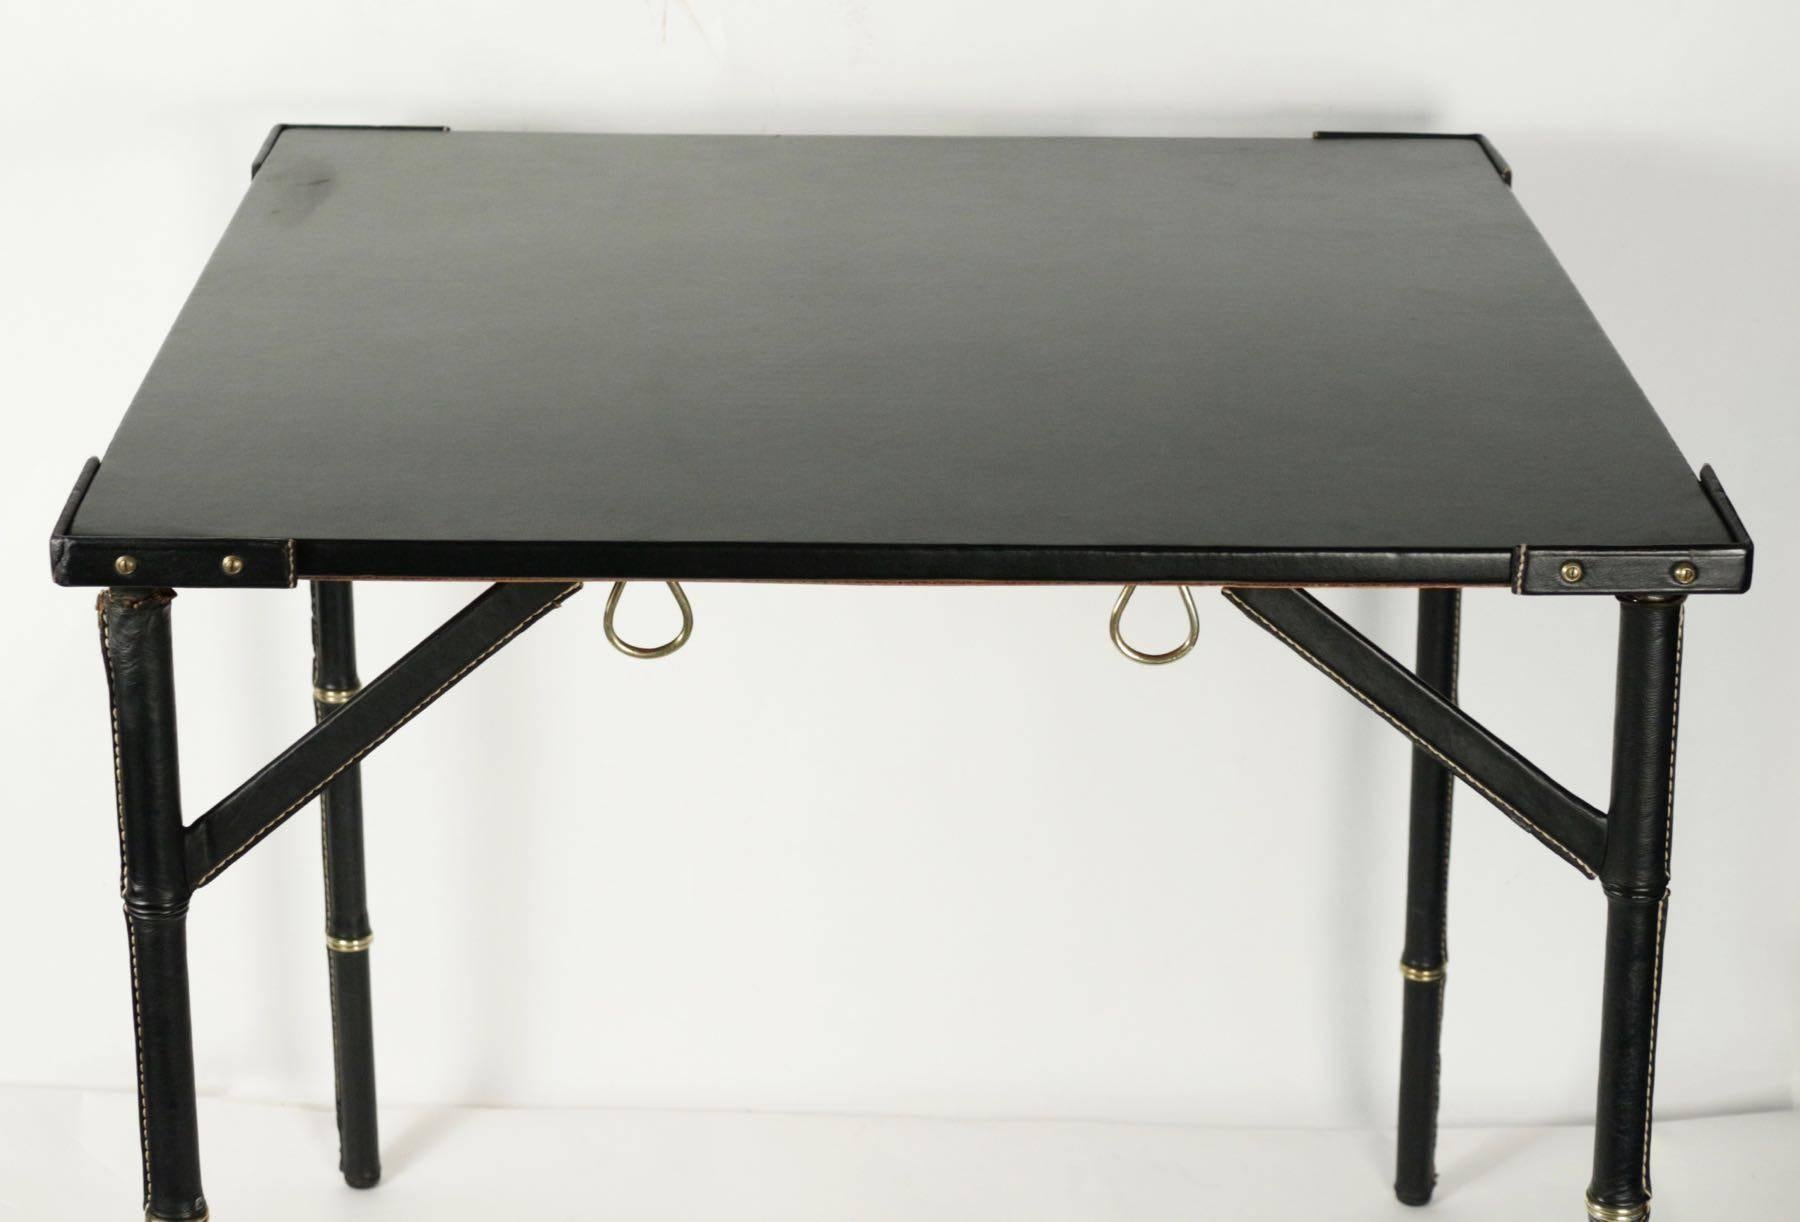 Jacques Adnet's black leather folding game table.
Bamboo style decorated with brass rings,
circa 1950.
Dimensions: 76.5 x 76.5 cm, height 73.5 cm.